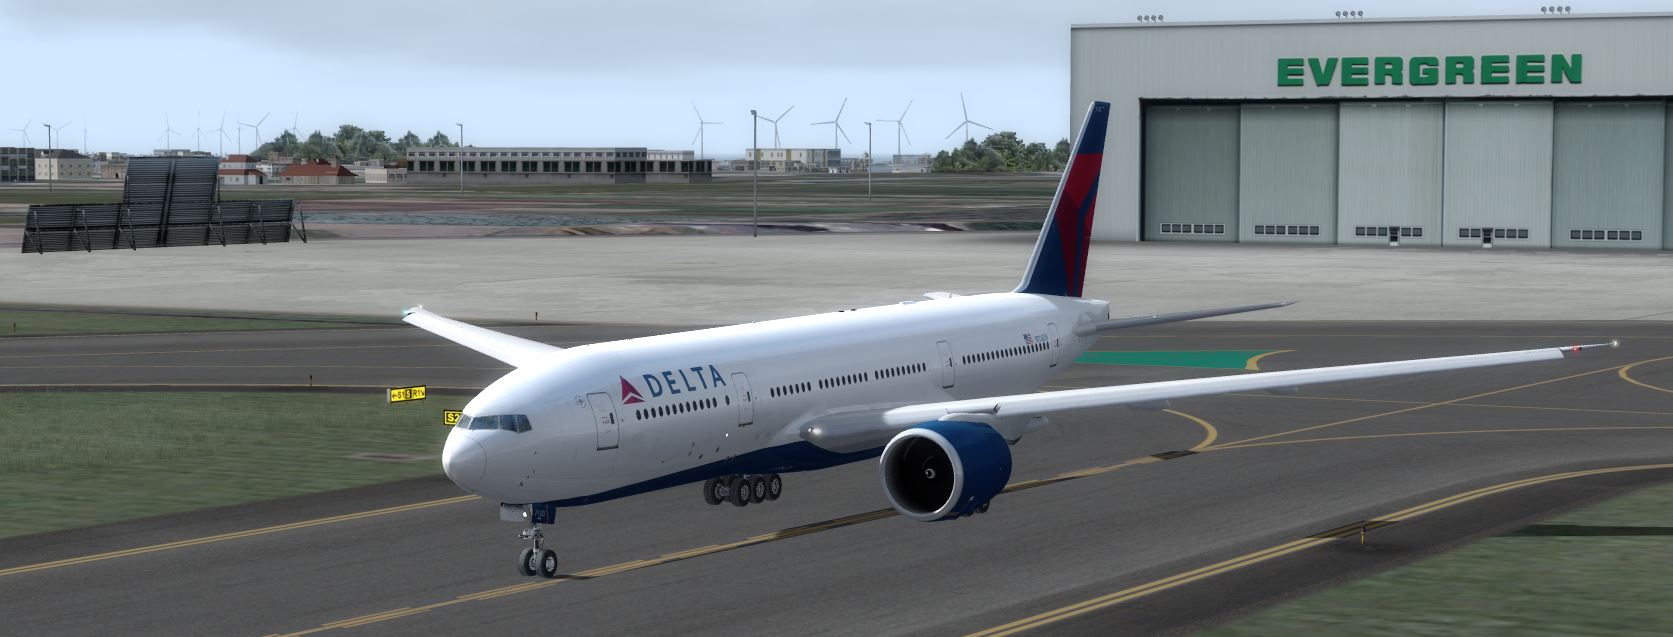 B777-200 Delta Airlines Standard Livery-6542 